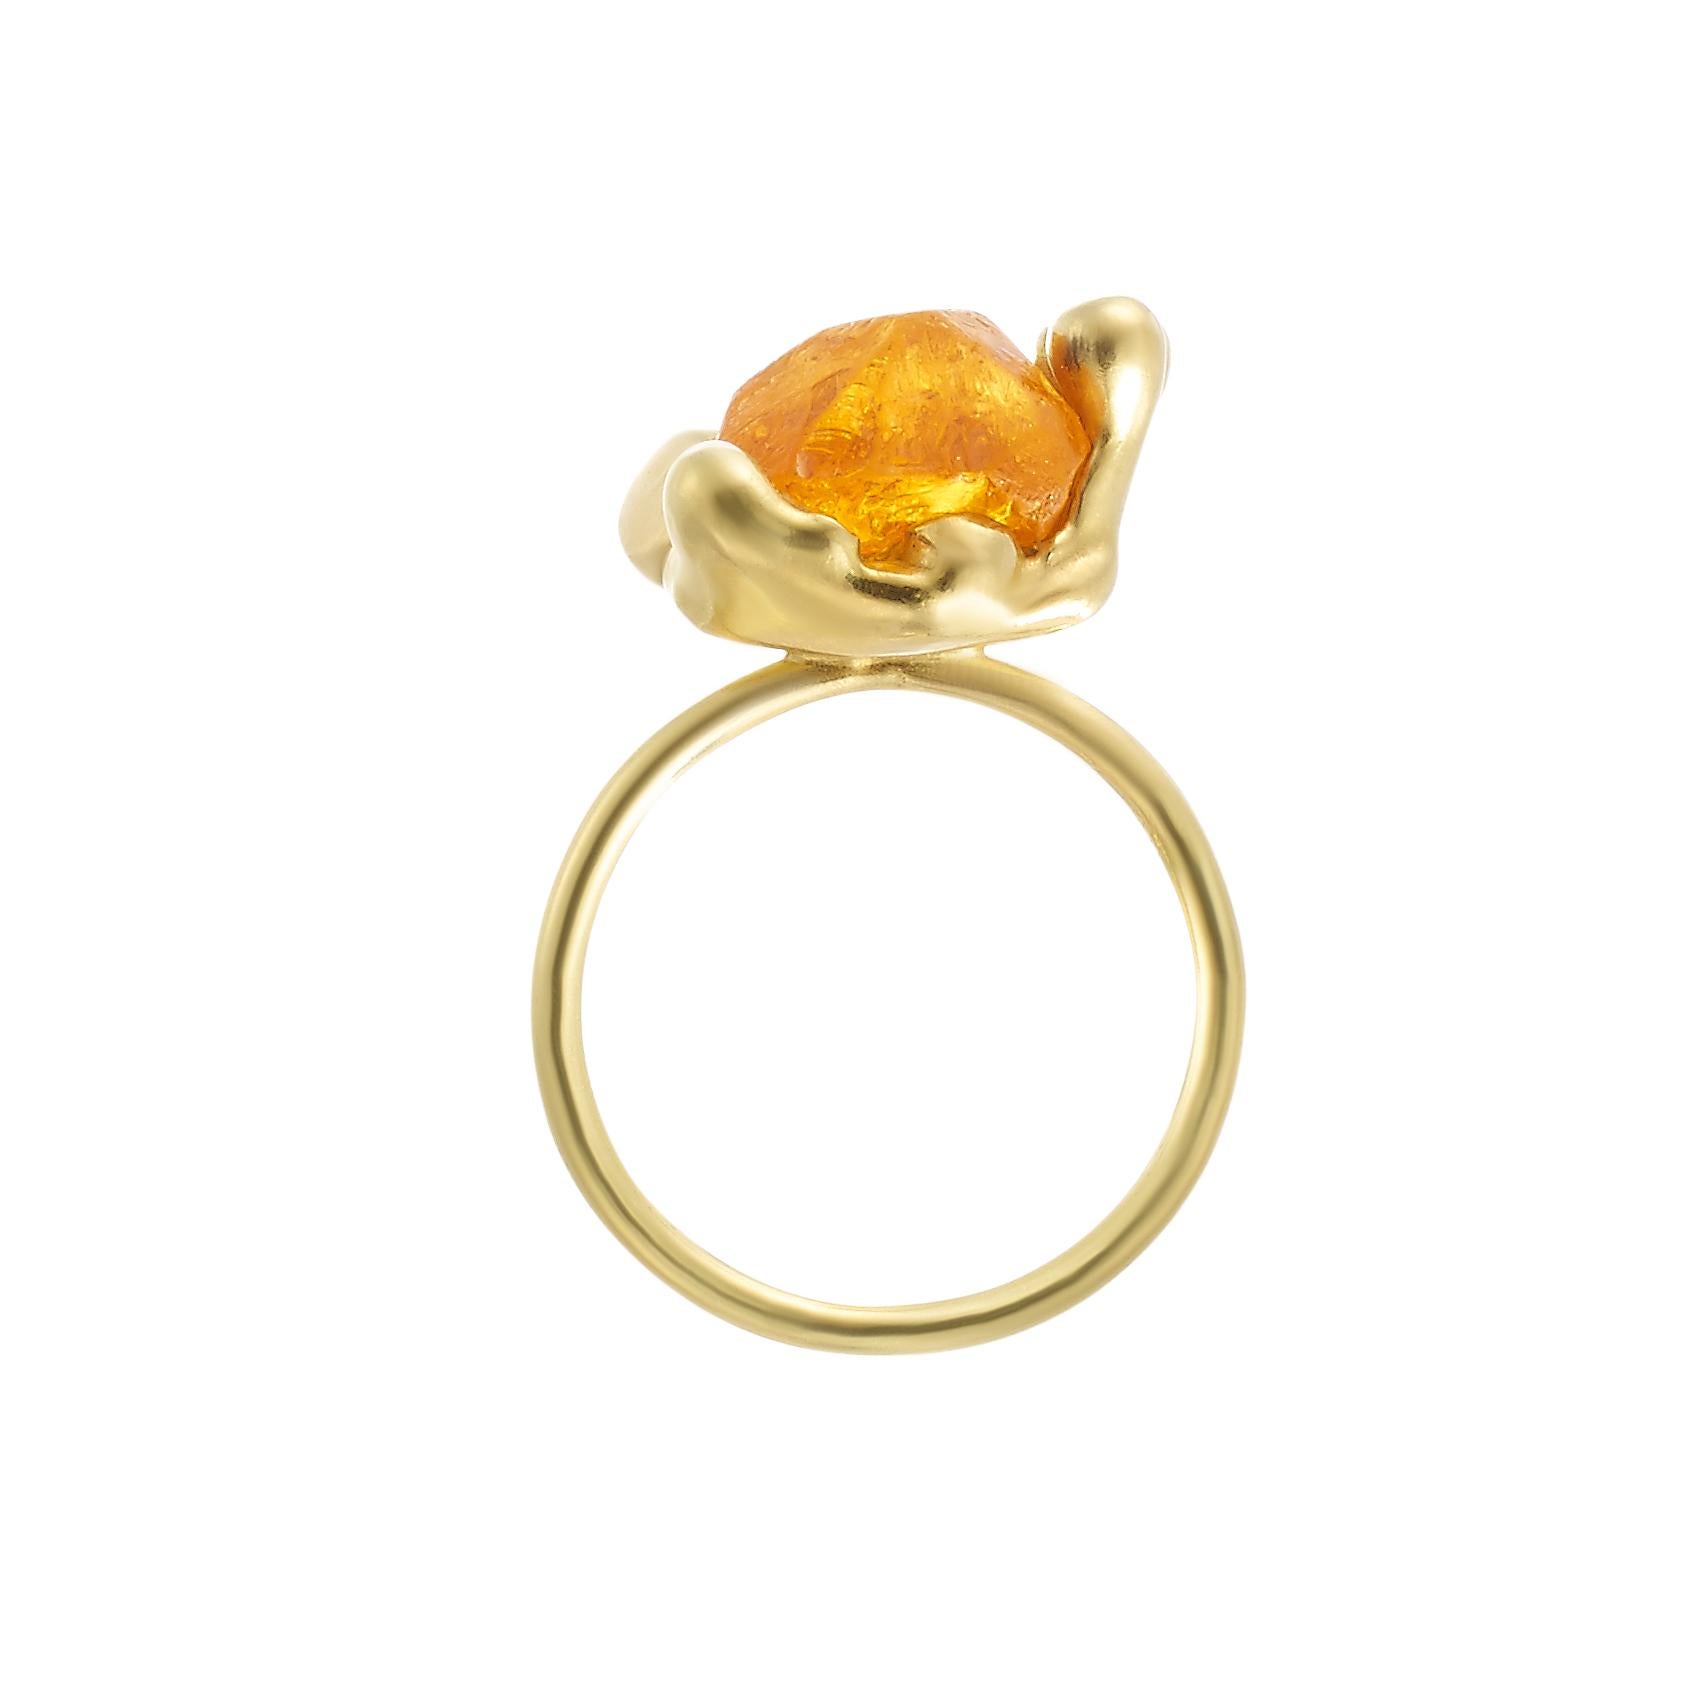 The Rock Hound are self confessed gem geeks and their RockStars Raw Collection is an homage to the structural form of natural crystals.

The RockStars Raw Spessartite Ring takes an orange Tanzanian Spessartite Garnet and drenches it in 18 Carat